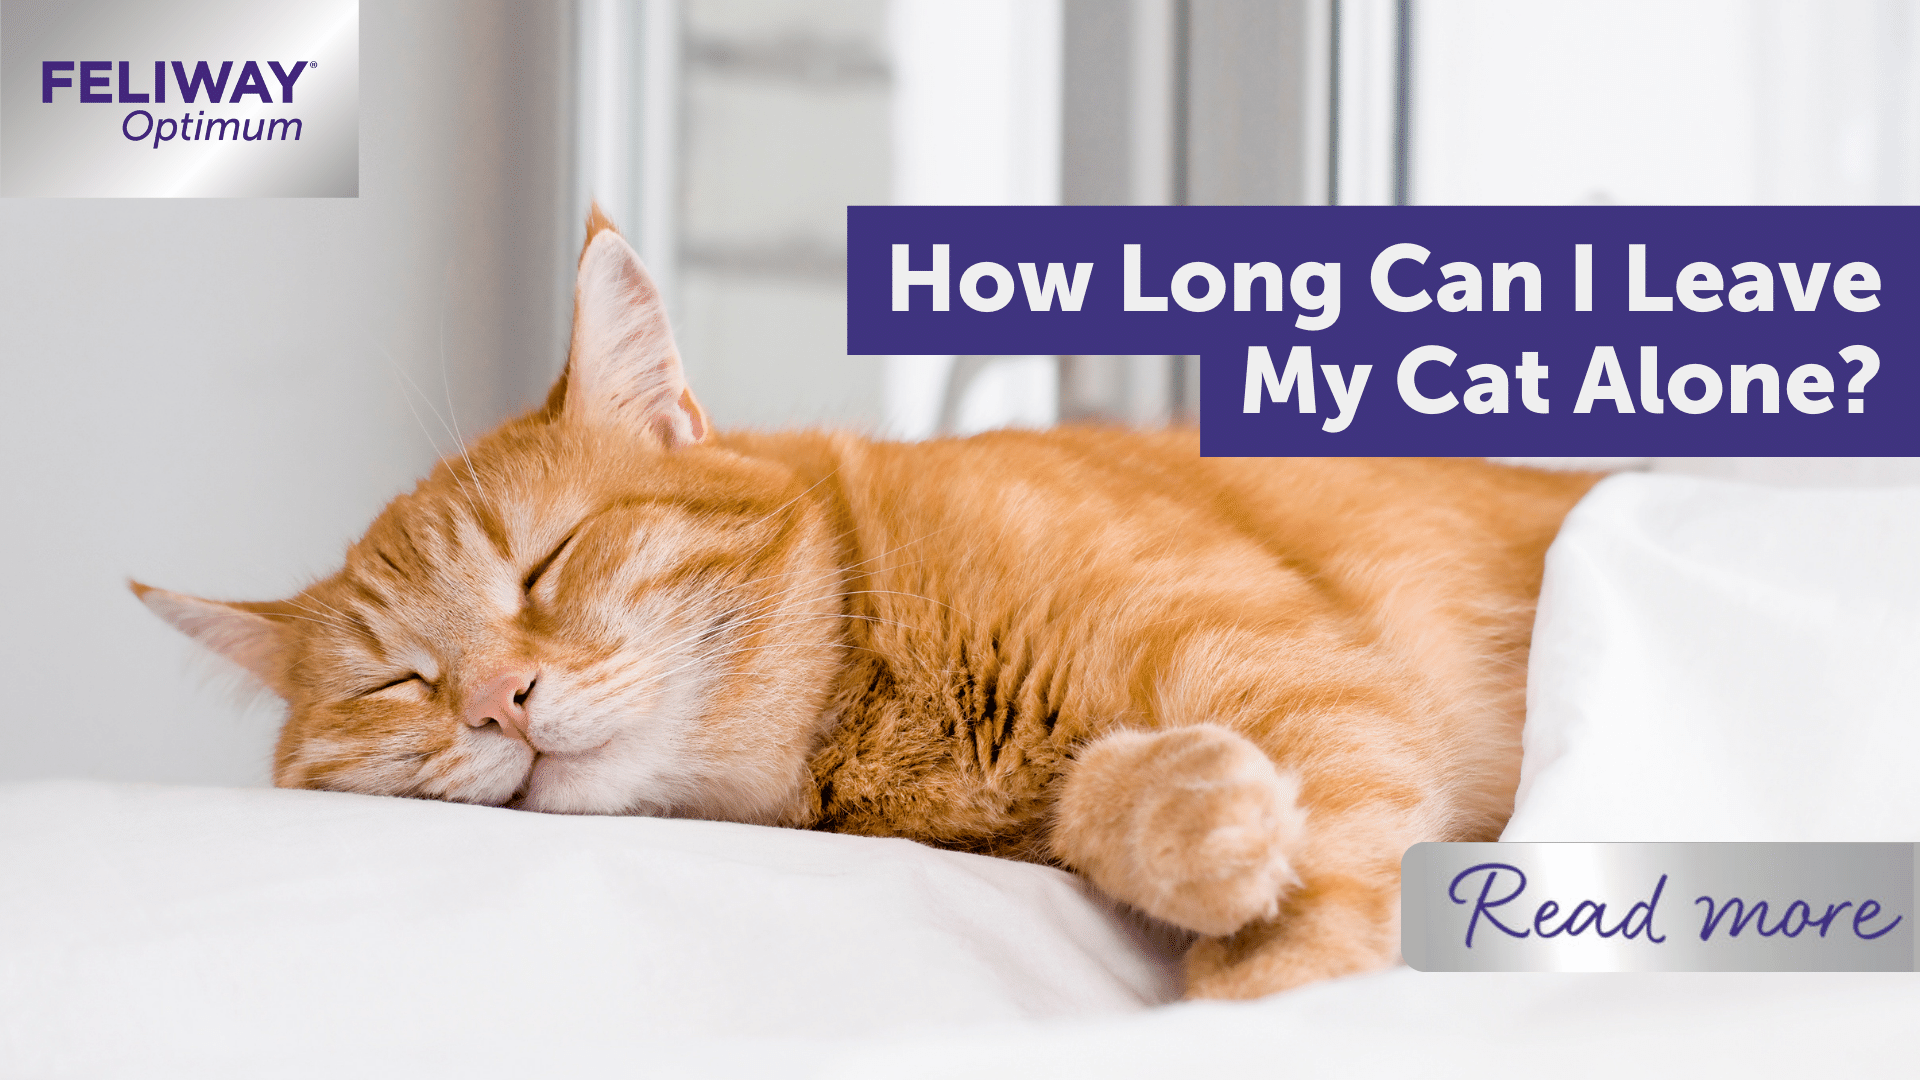 How Long Can I Leave My Cat Alone?